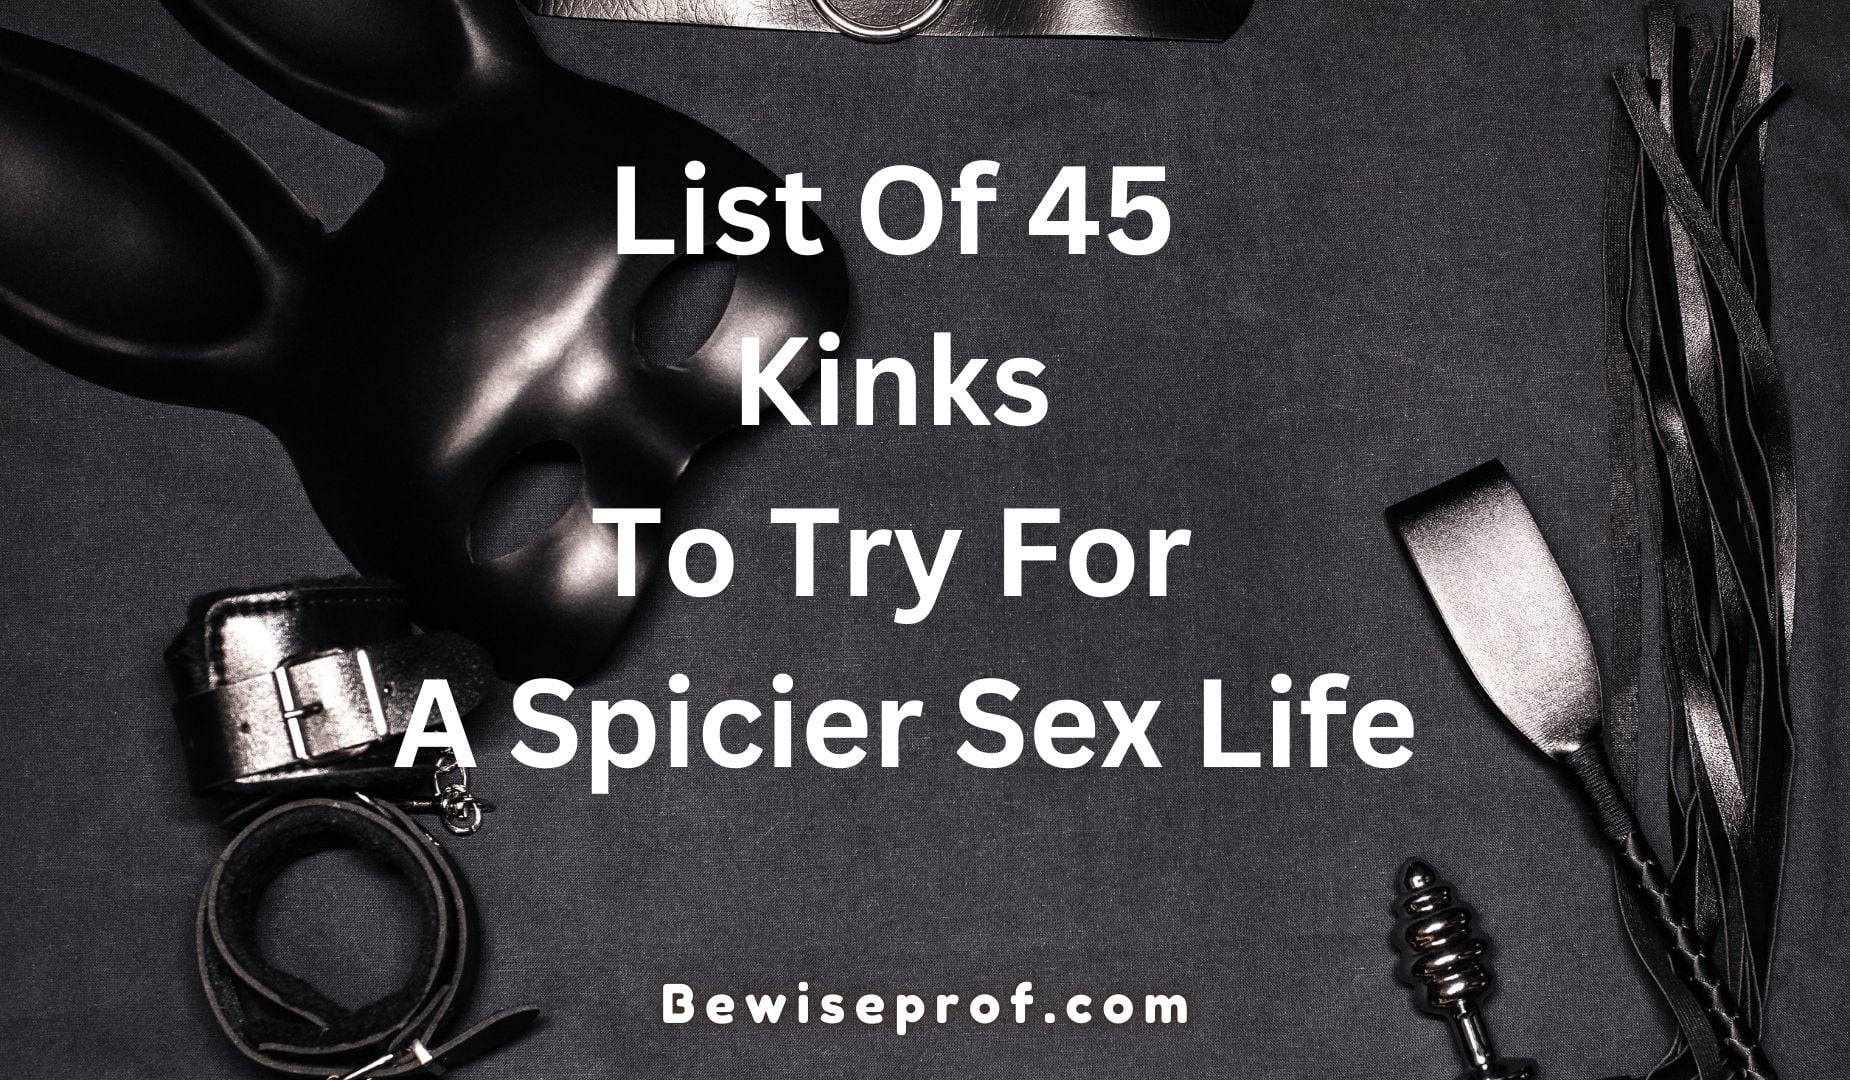 List Of 45 Kinks To Try For A Spicier Sex Life